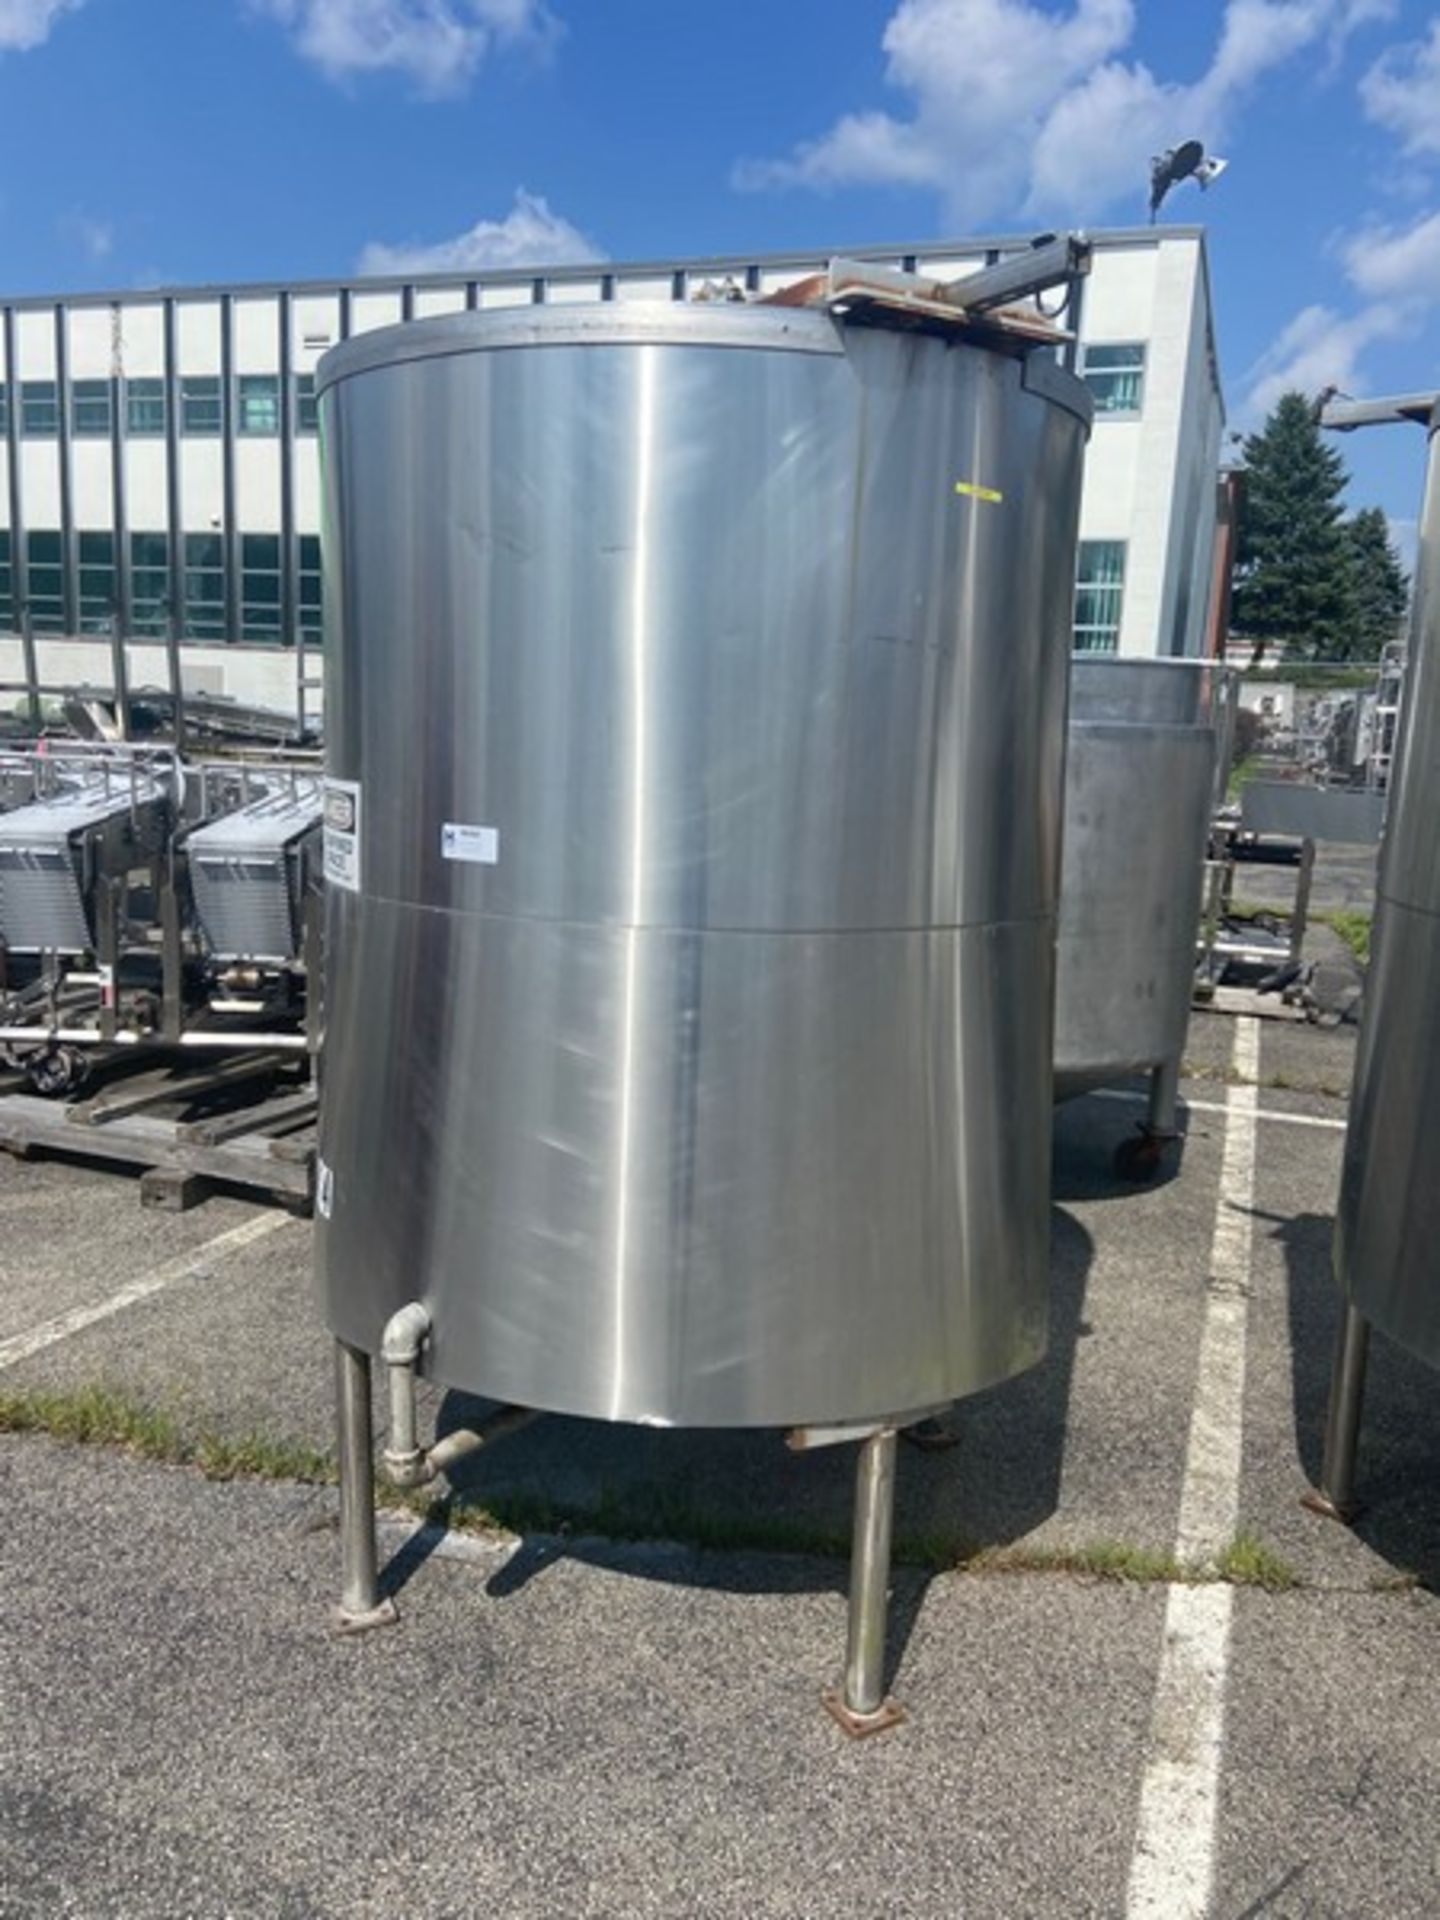 Aprox. 500 Gal. S/S Jacketed Tank, Internal Dims.: Aprox. 62” L x 49” Dia., Mounted on S/S Legs (15)